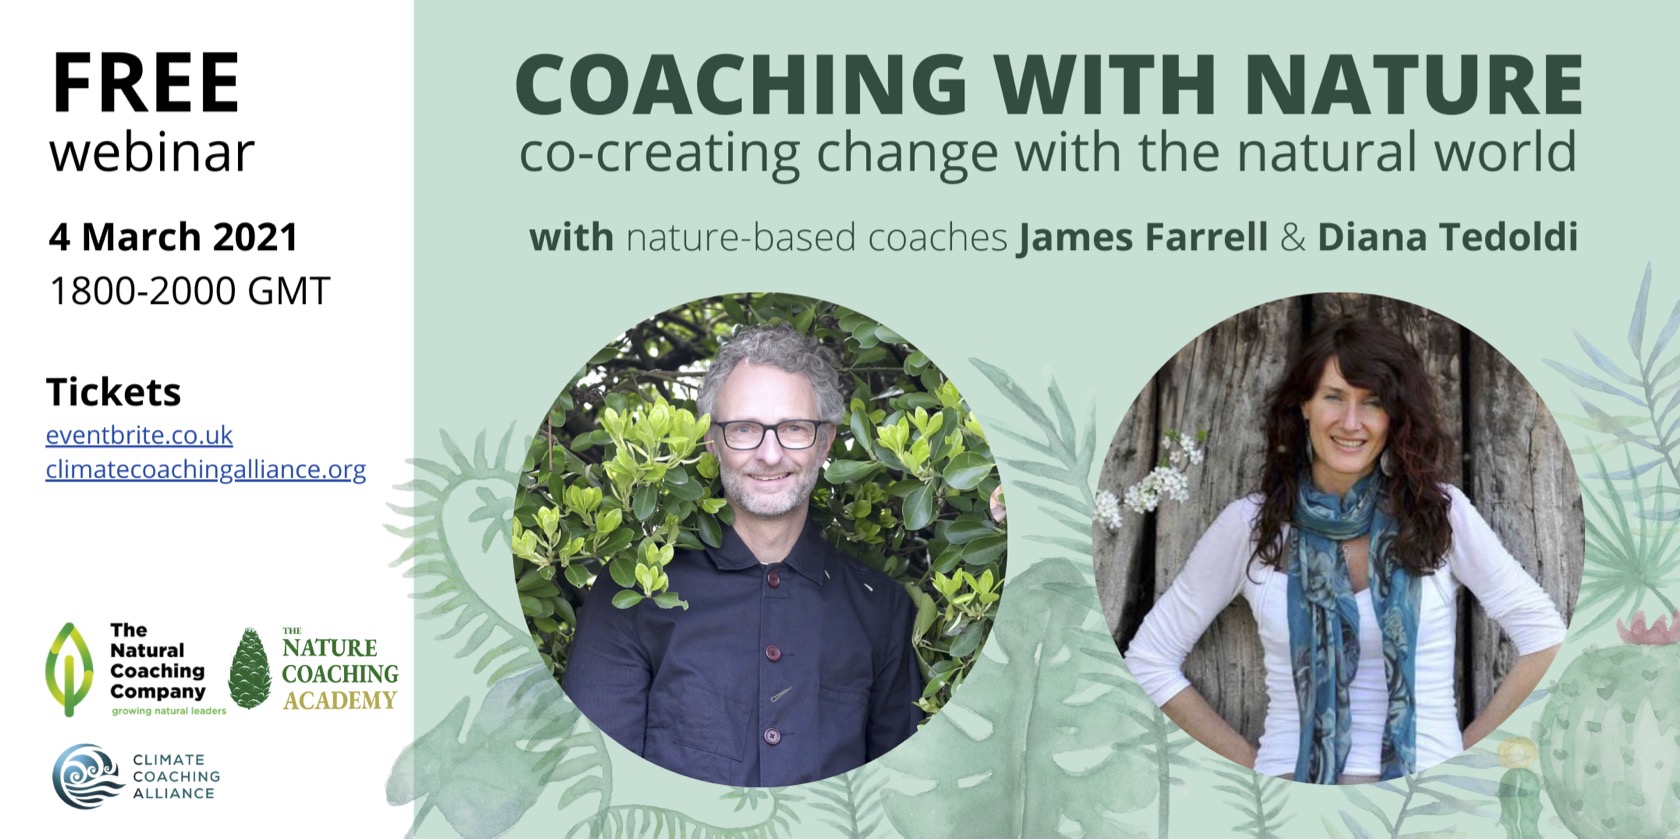 COACHING WITH NATURE: Co-creating change with the natural world